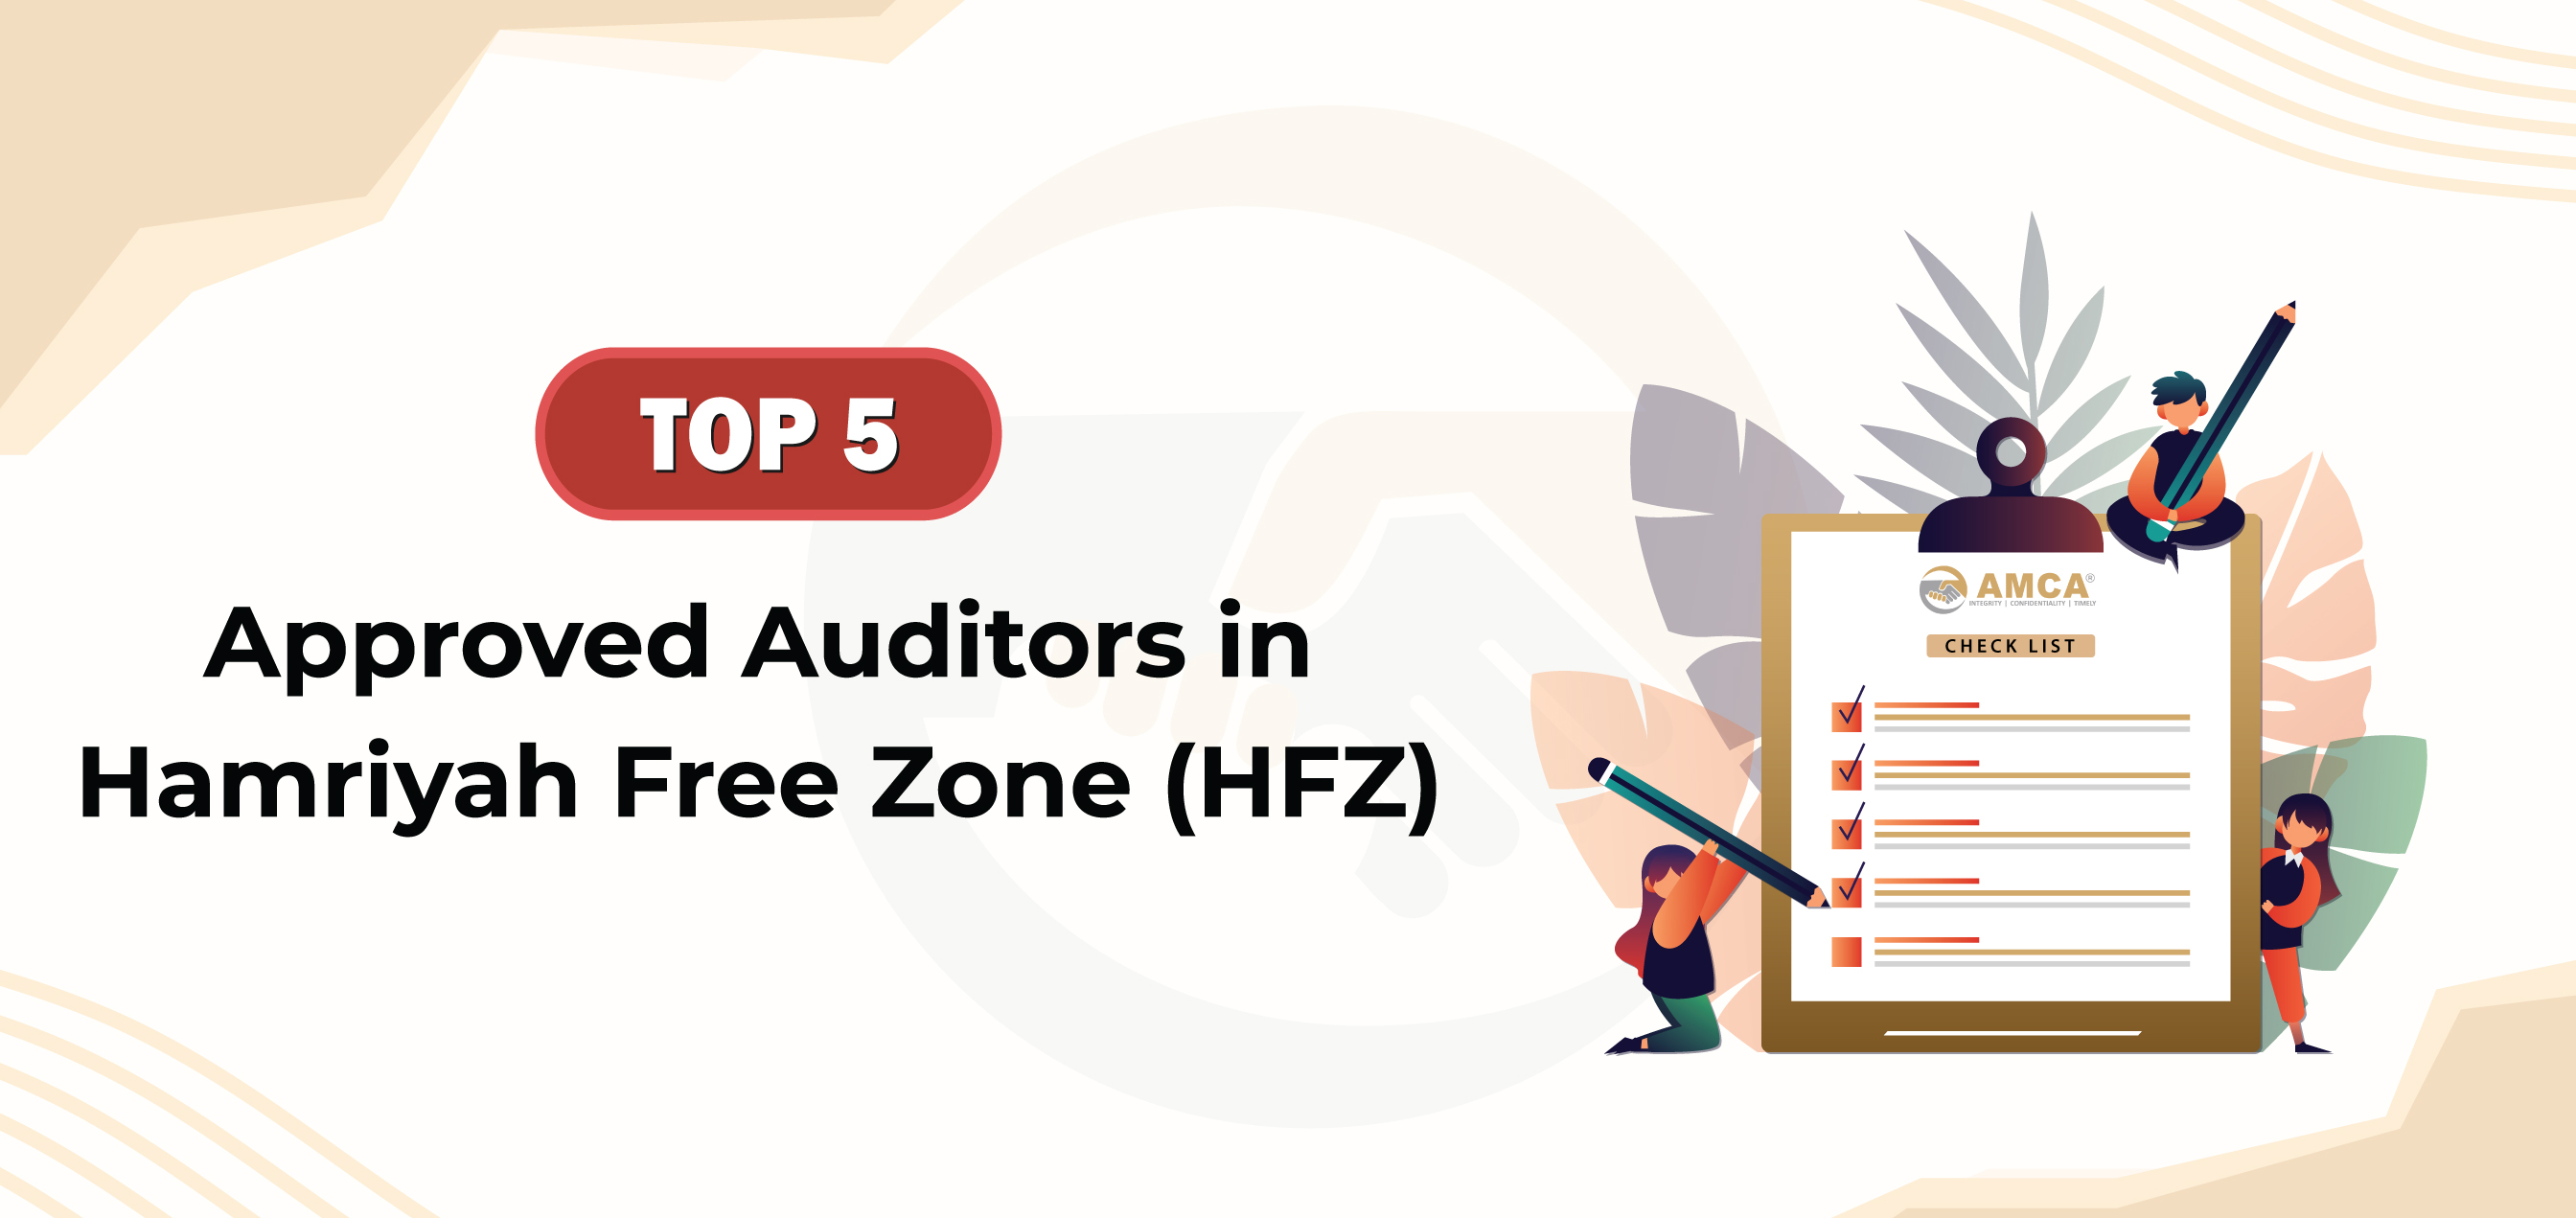 top-approved-auditors-in-hamriyah-free-zone